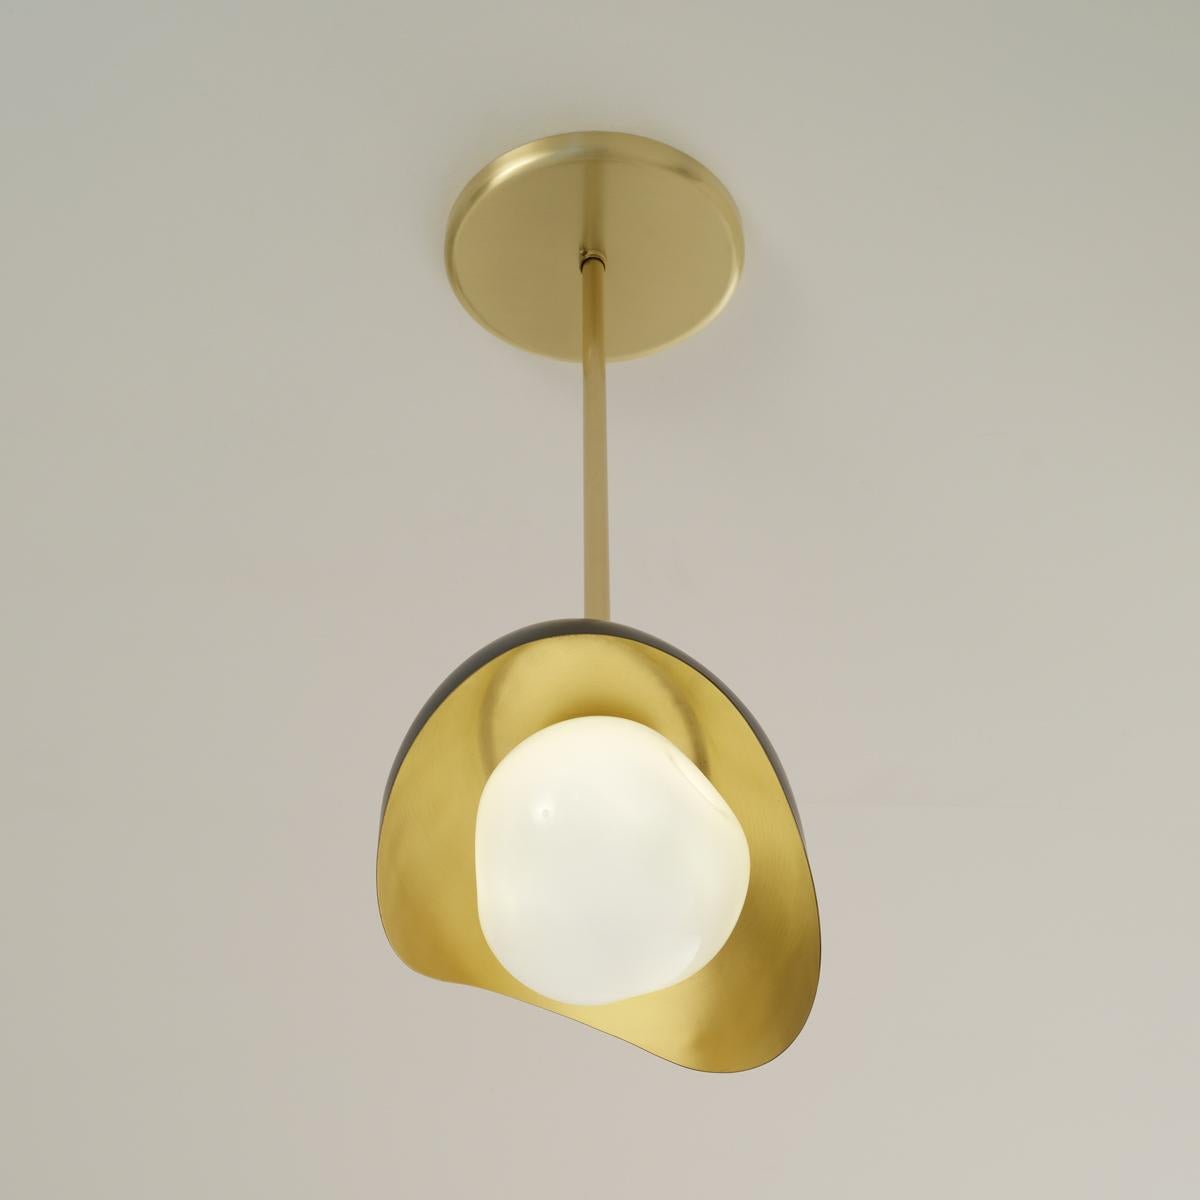 Perla Pendant by Gaspare Asaro-Black and Satin Brass In New Condition For Sale In New York, NY